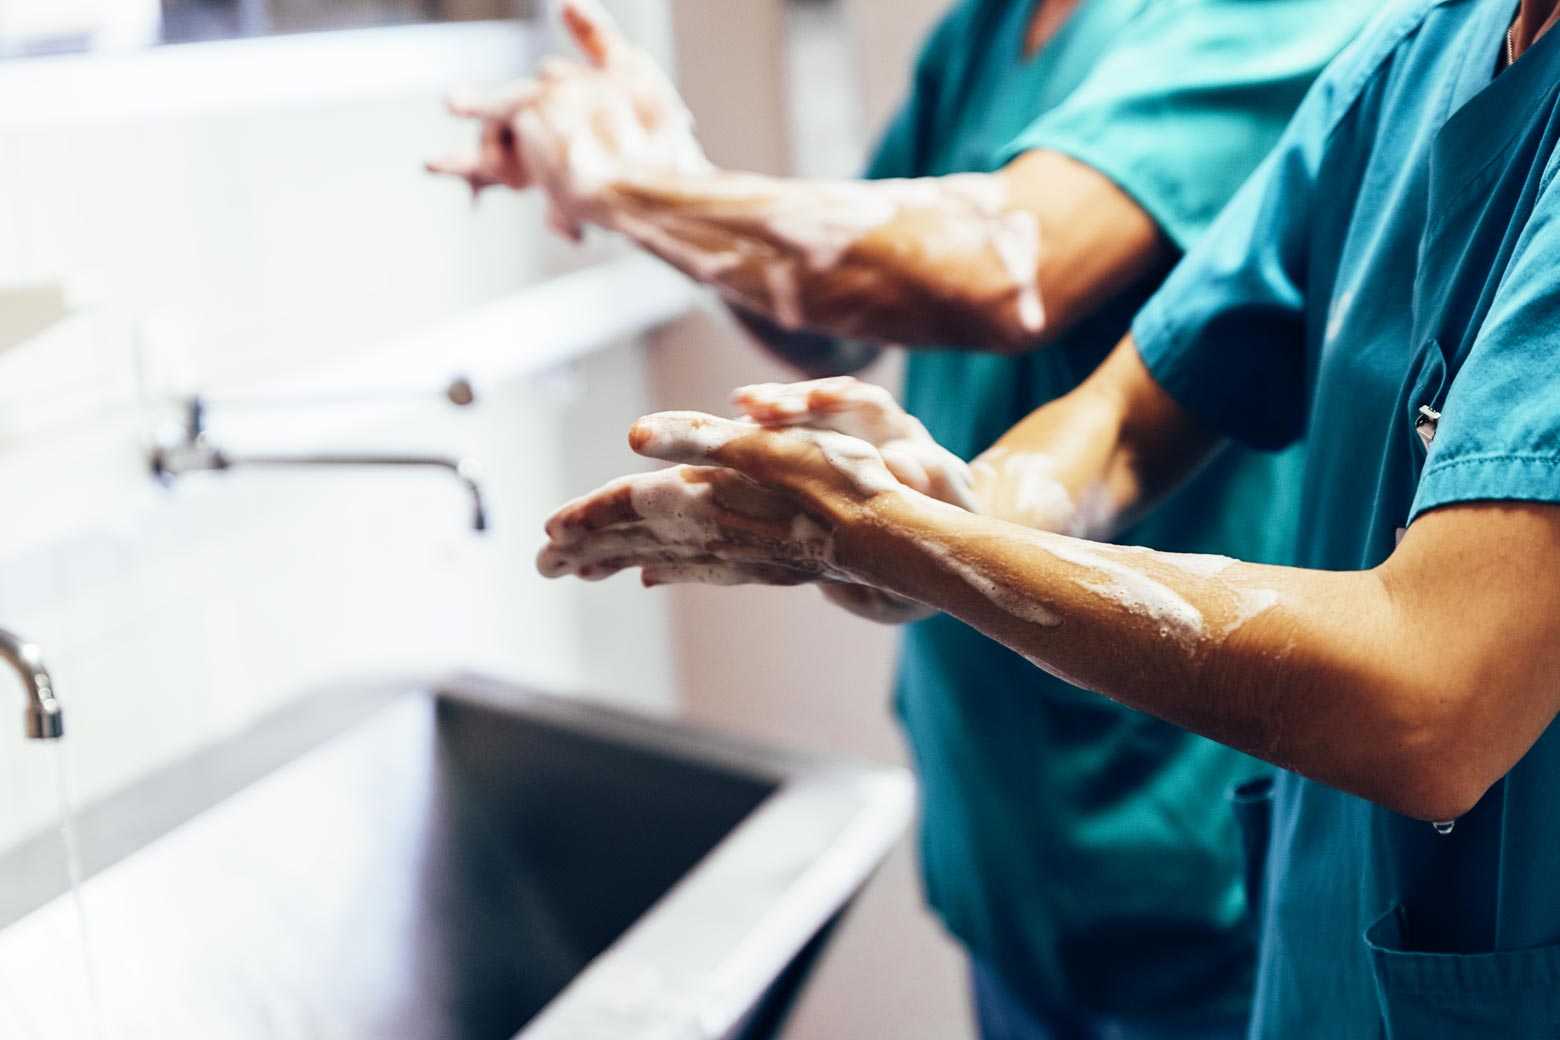 Medical professionals wash their hands.